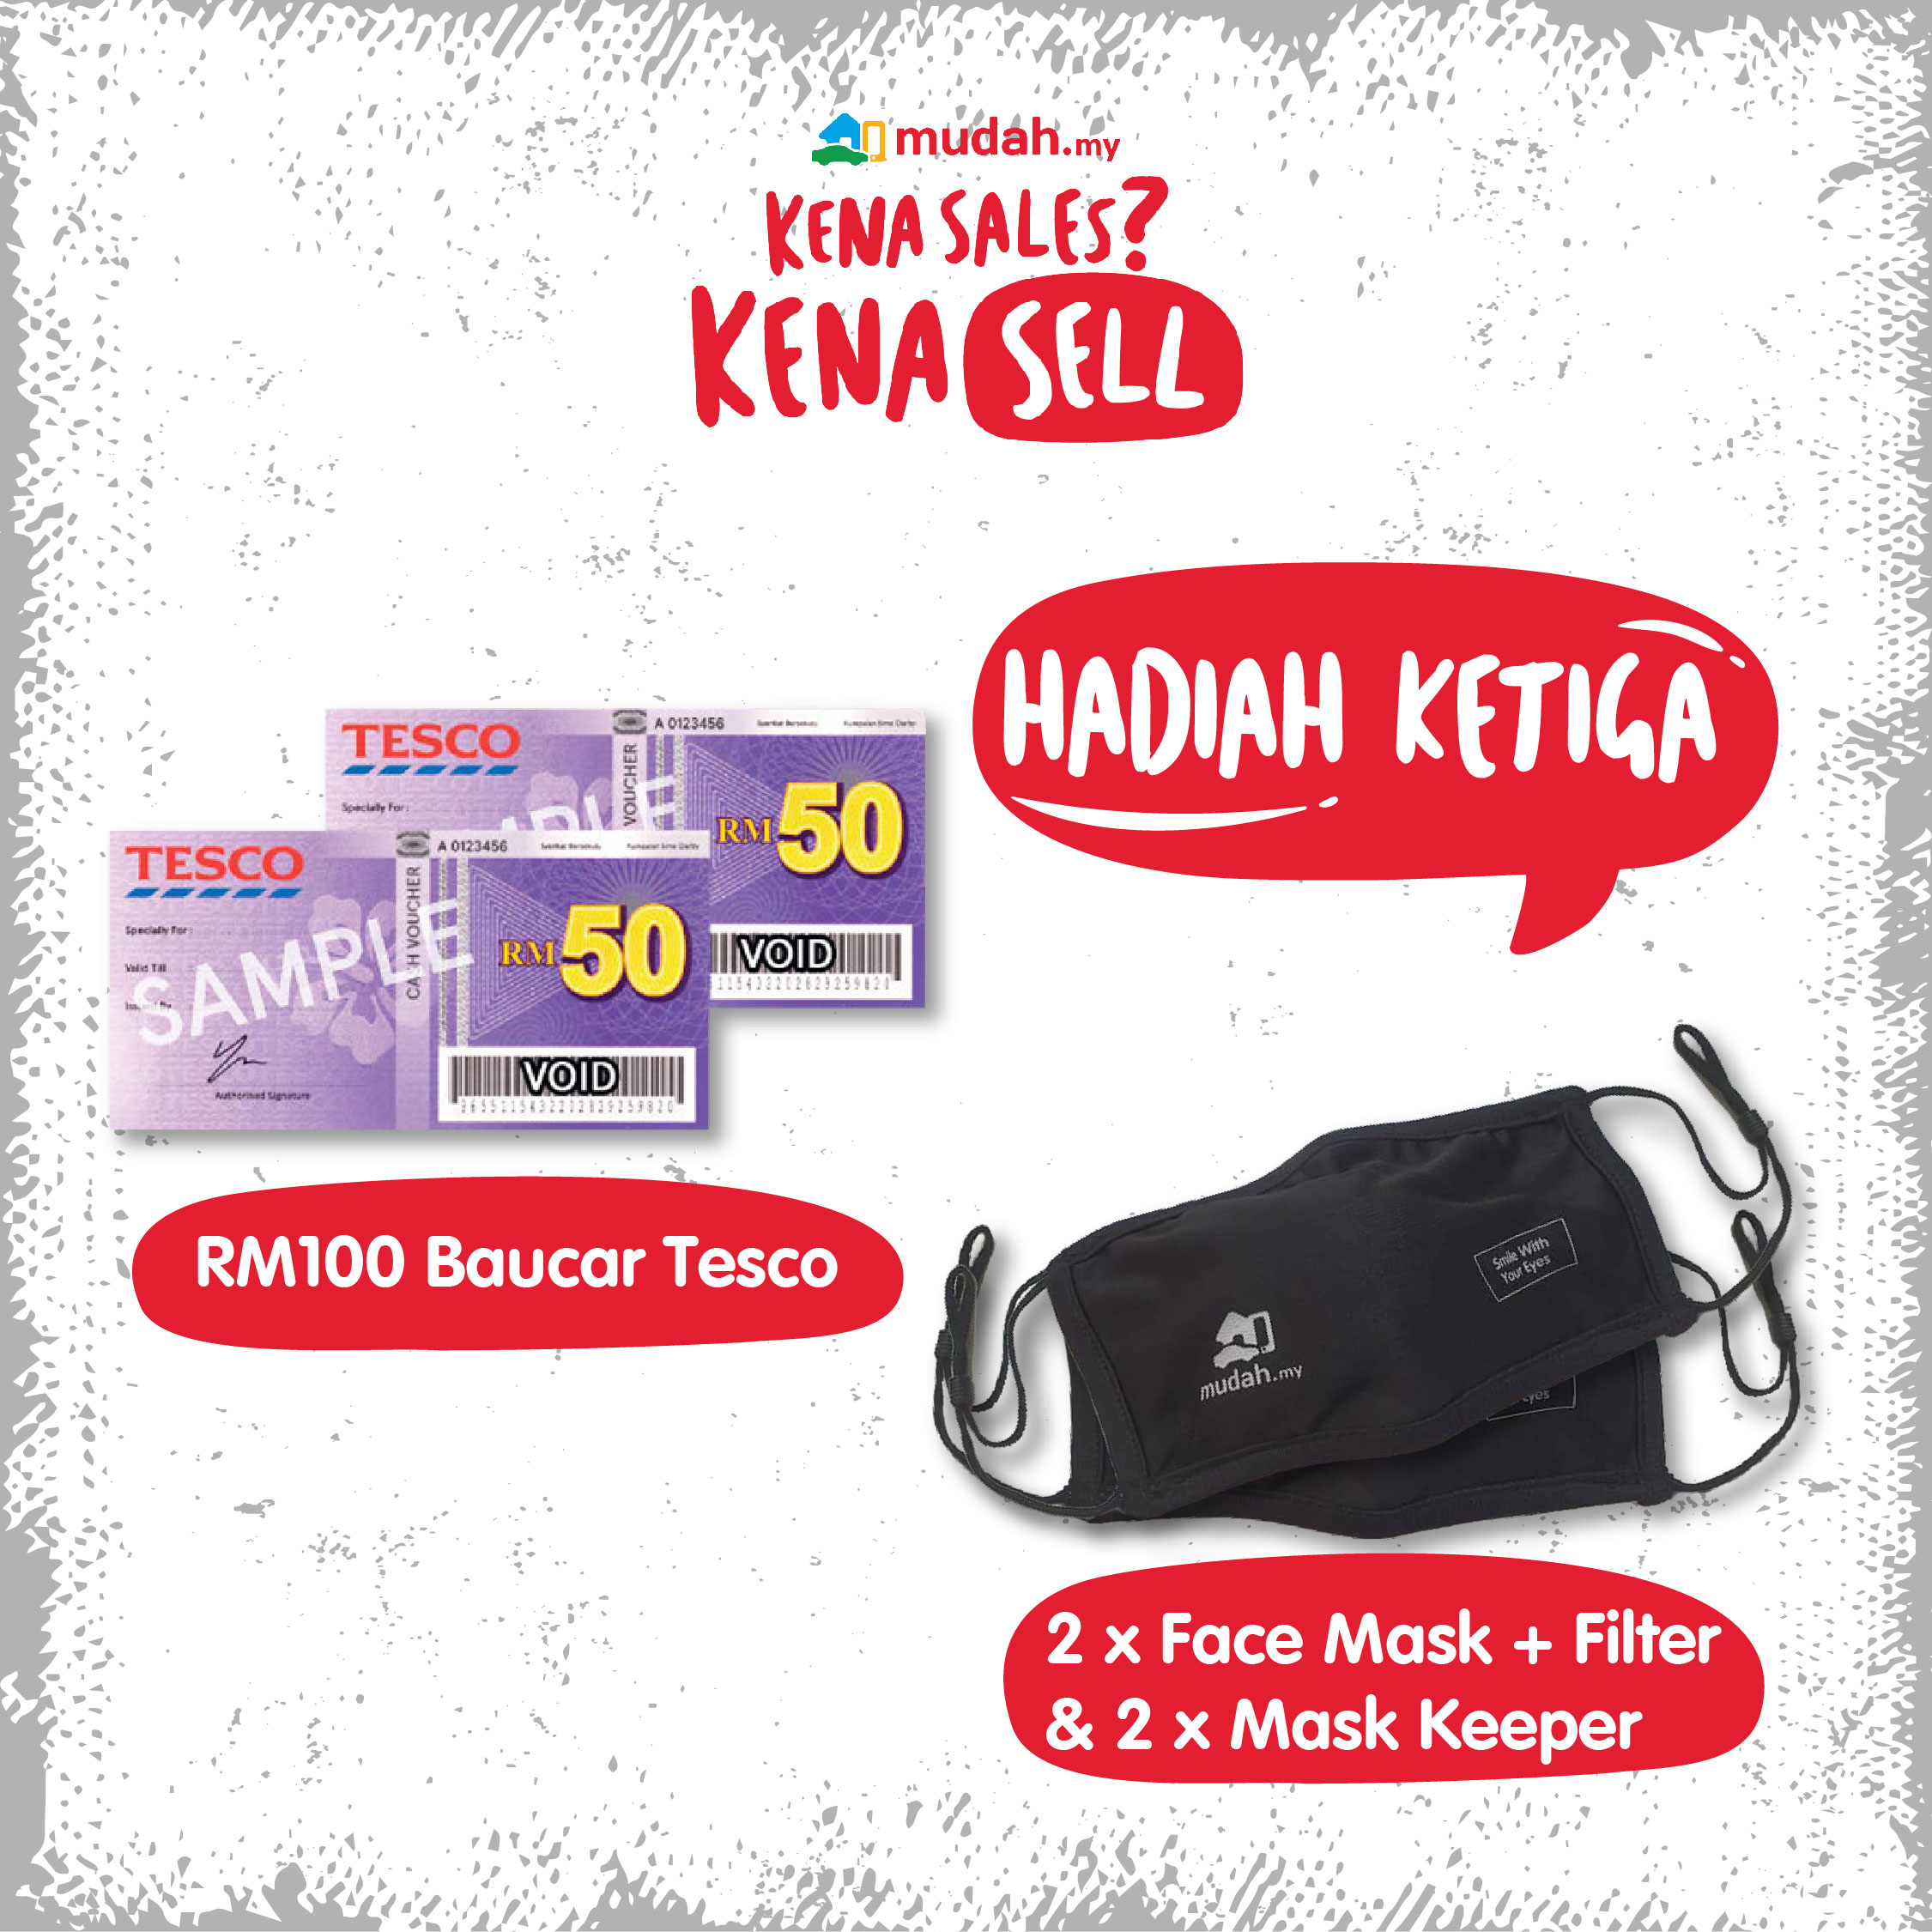 Sell Your Stuff Online On Mudah.my And Win Prizes